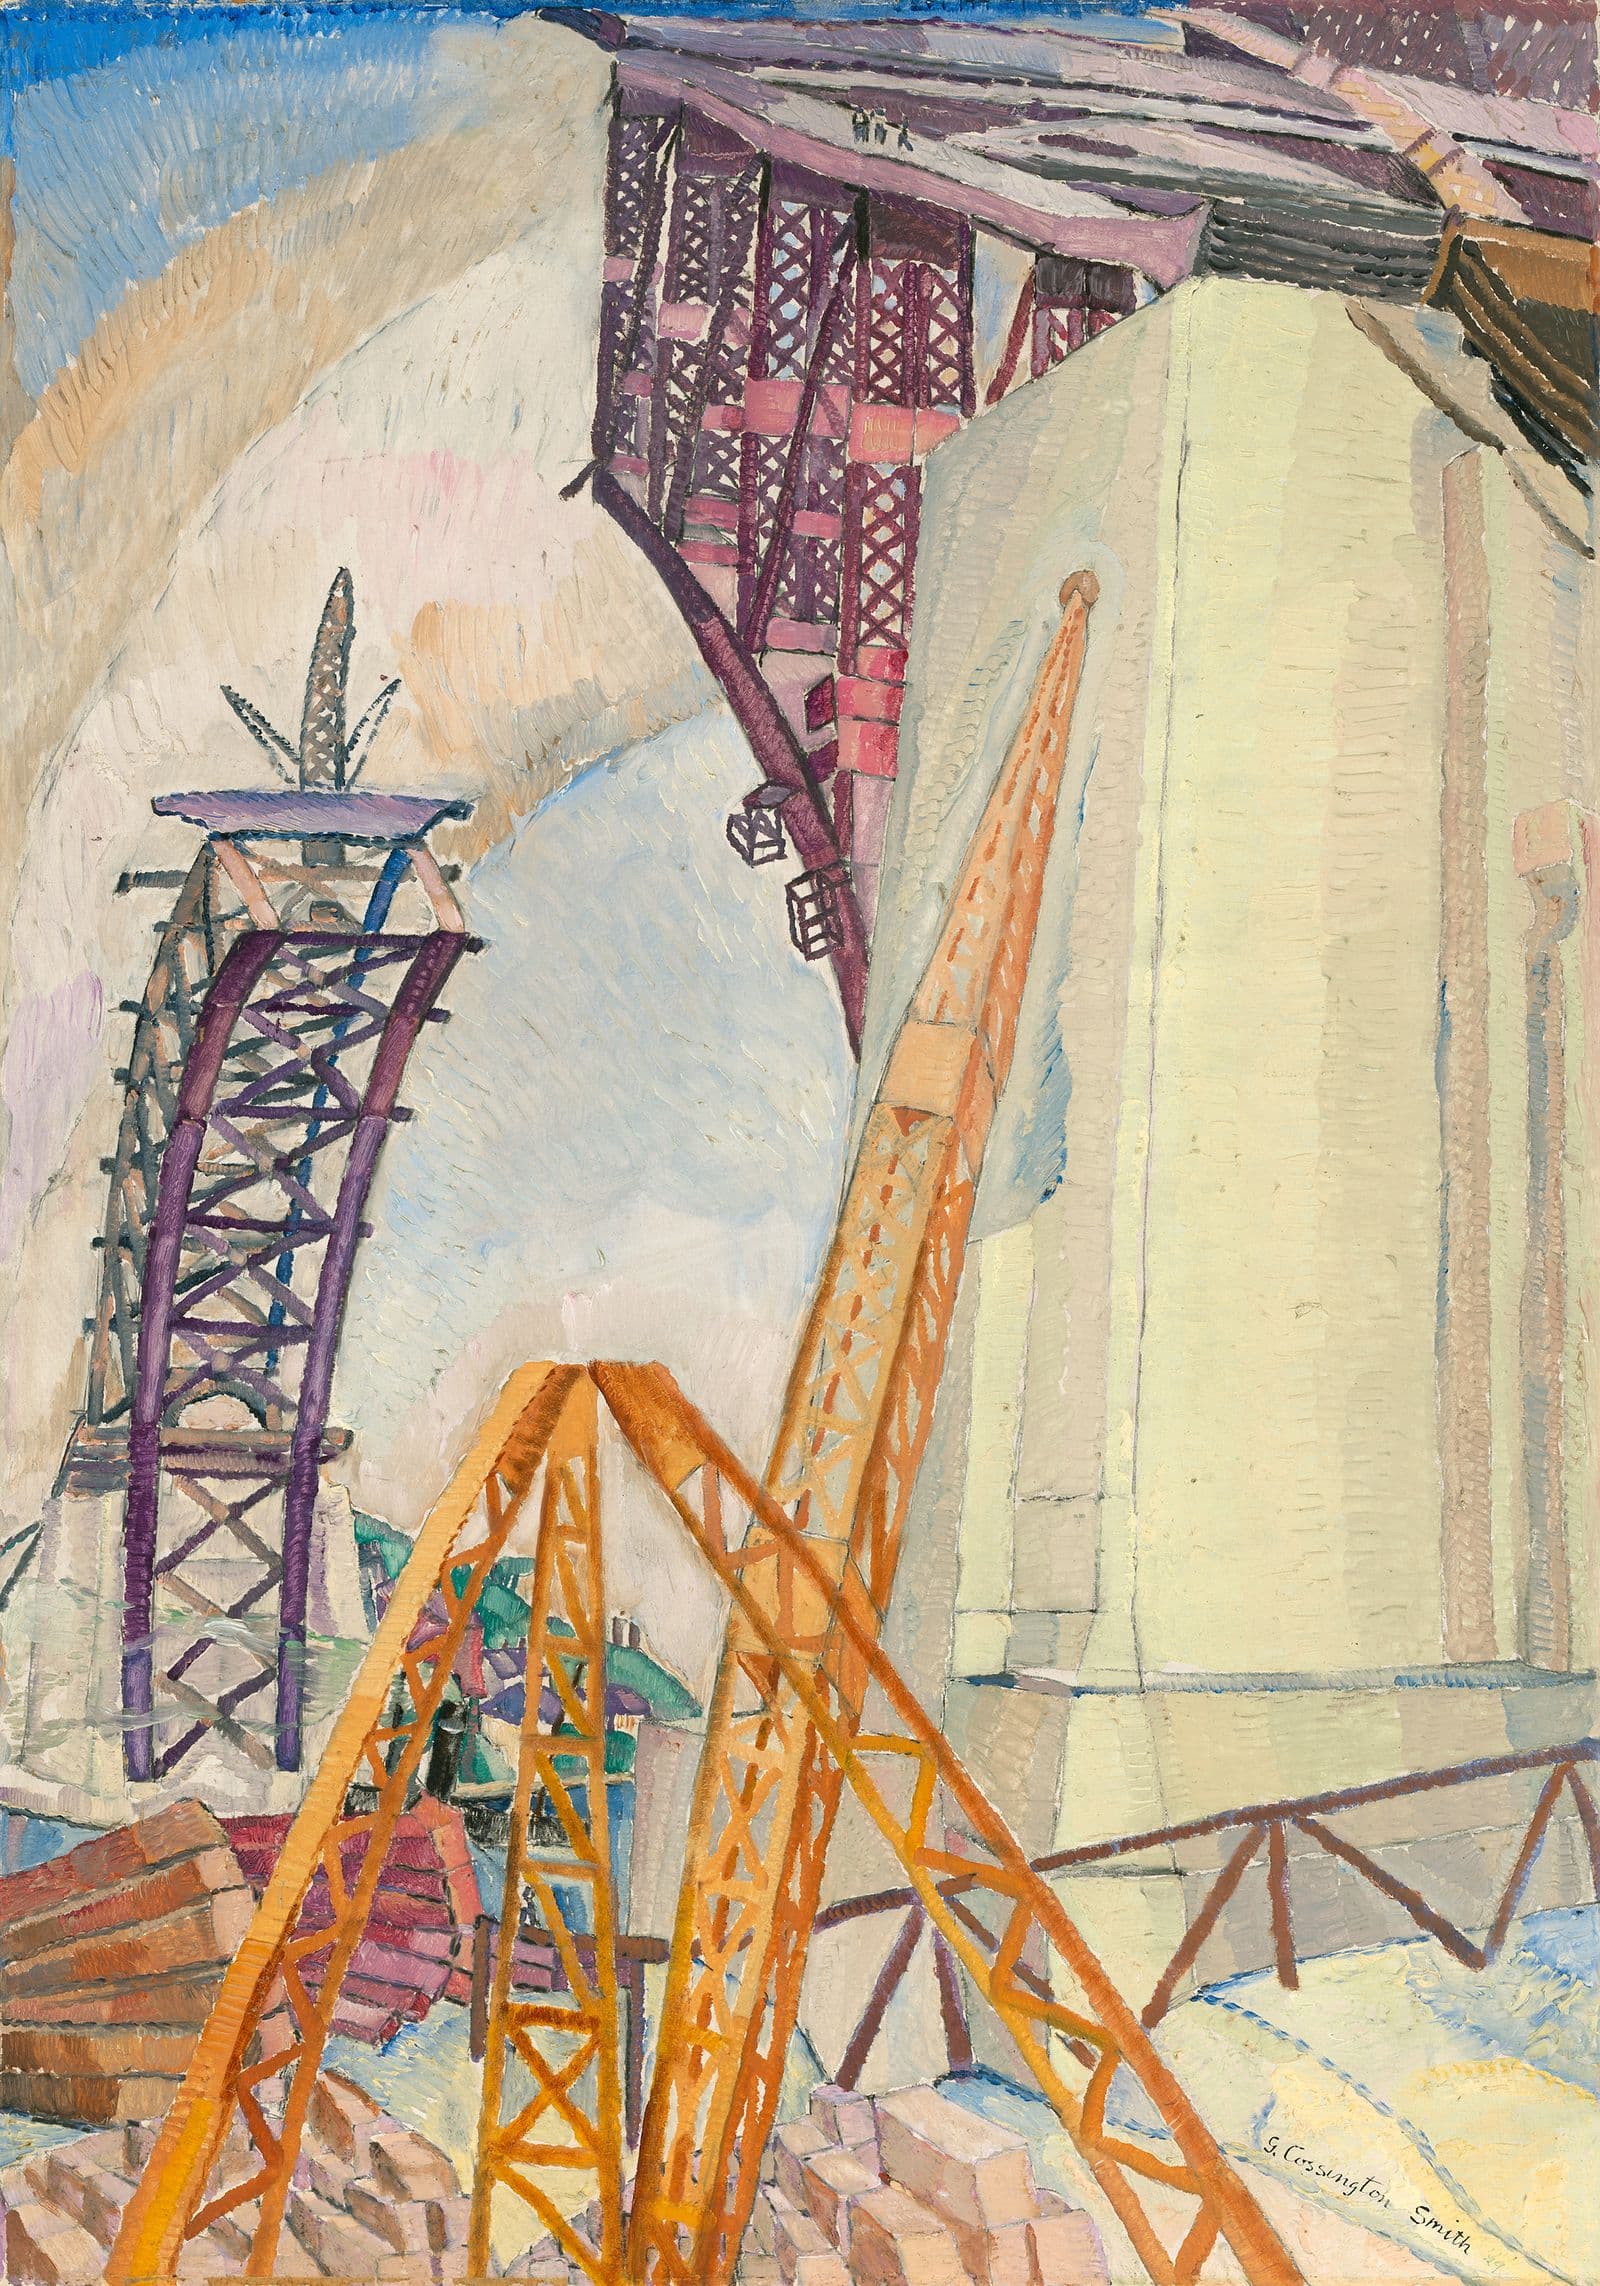 Abstract depiction of the construction of the Harbour Bridge in Sydney, NSW